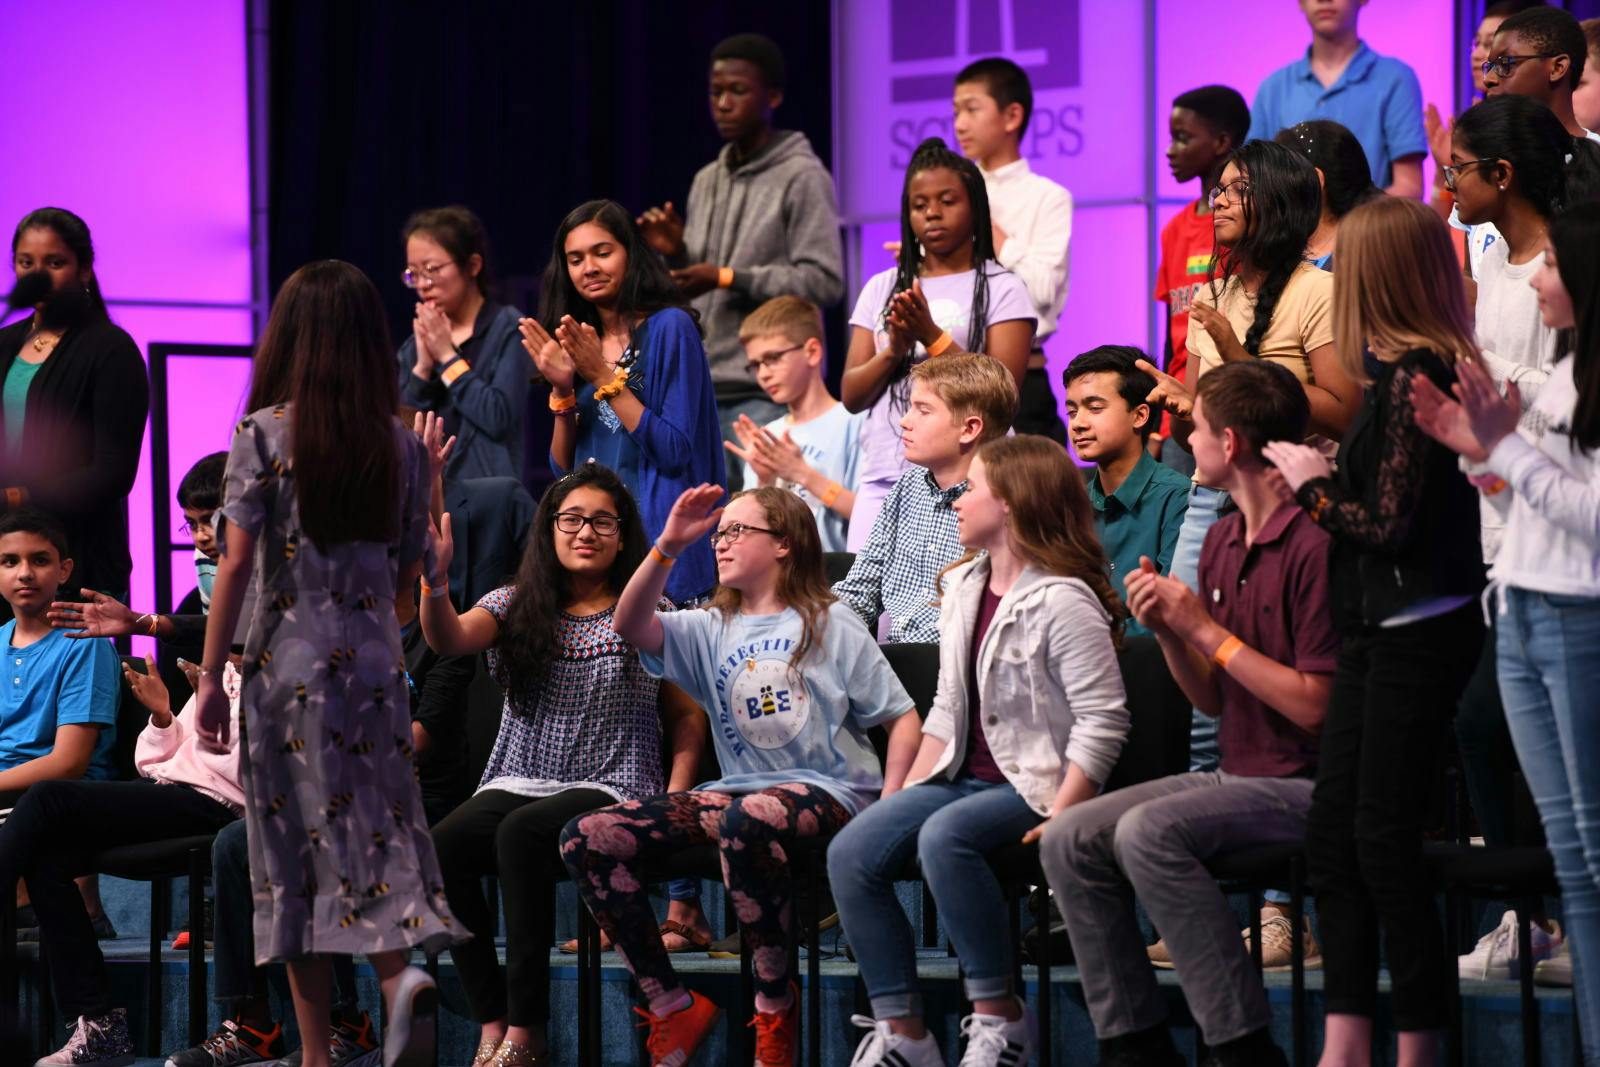 The 2019 Scripps National Spelling Bee